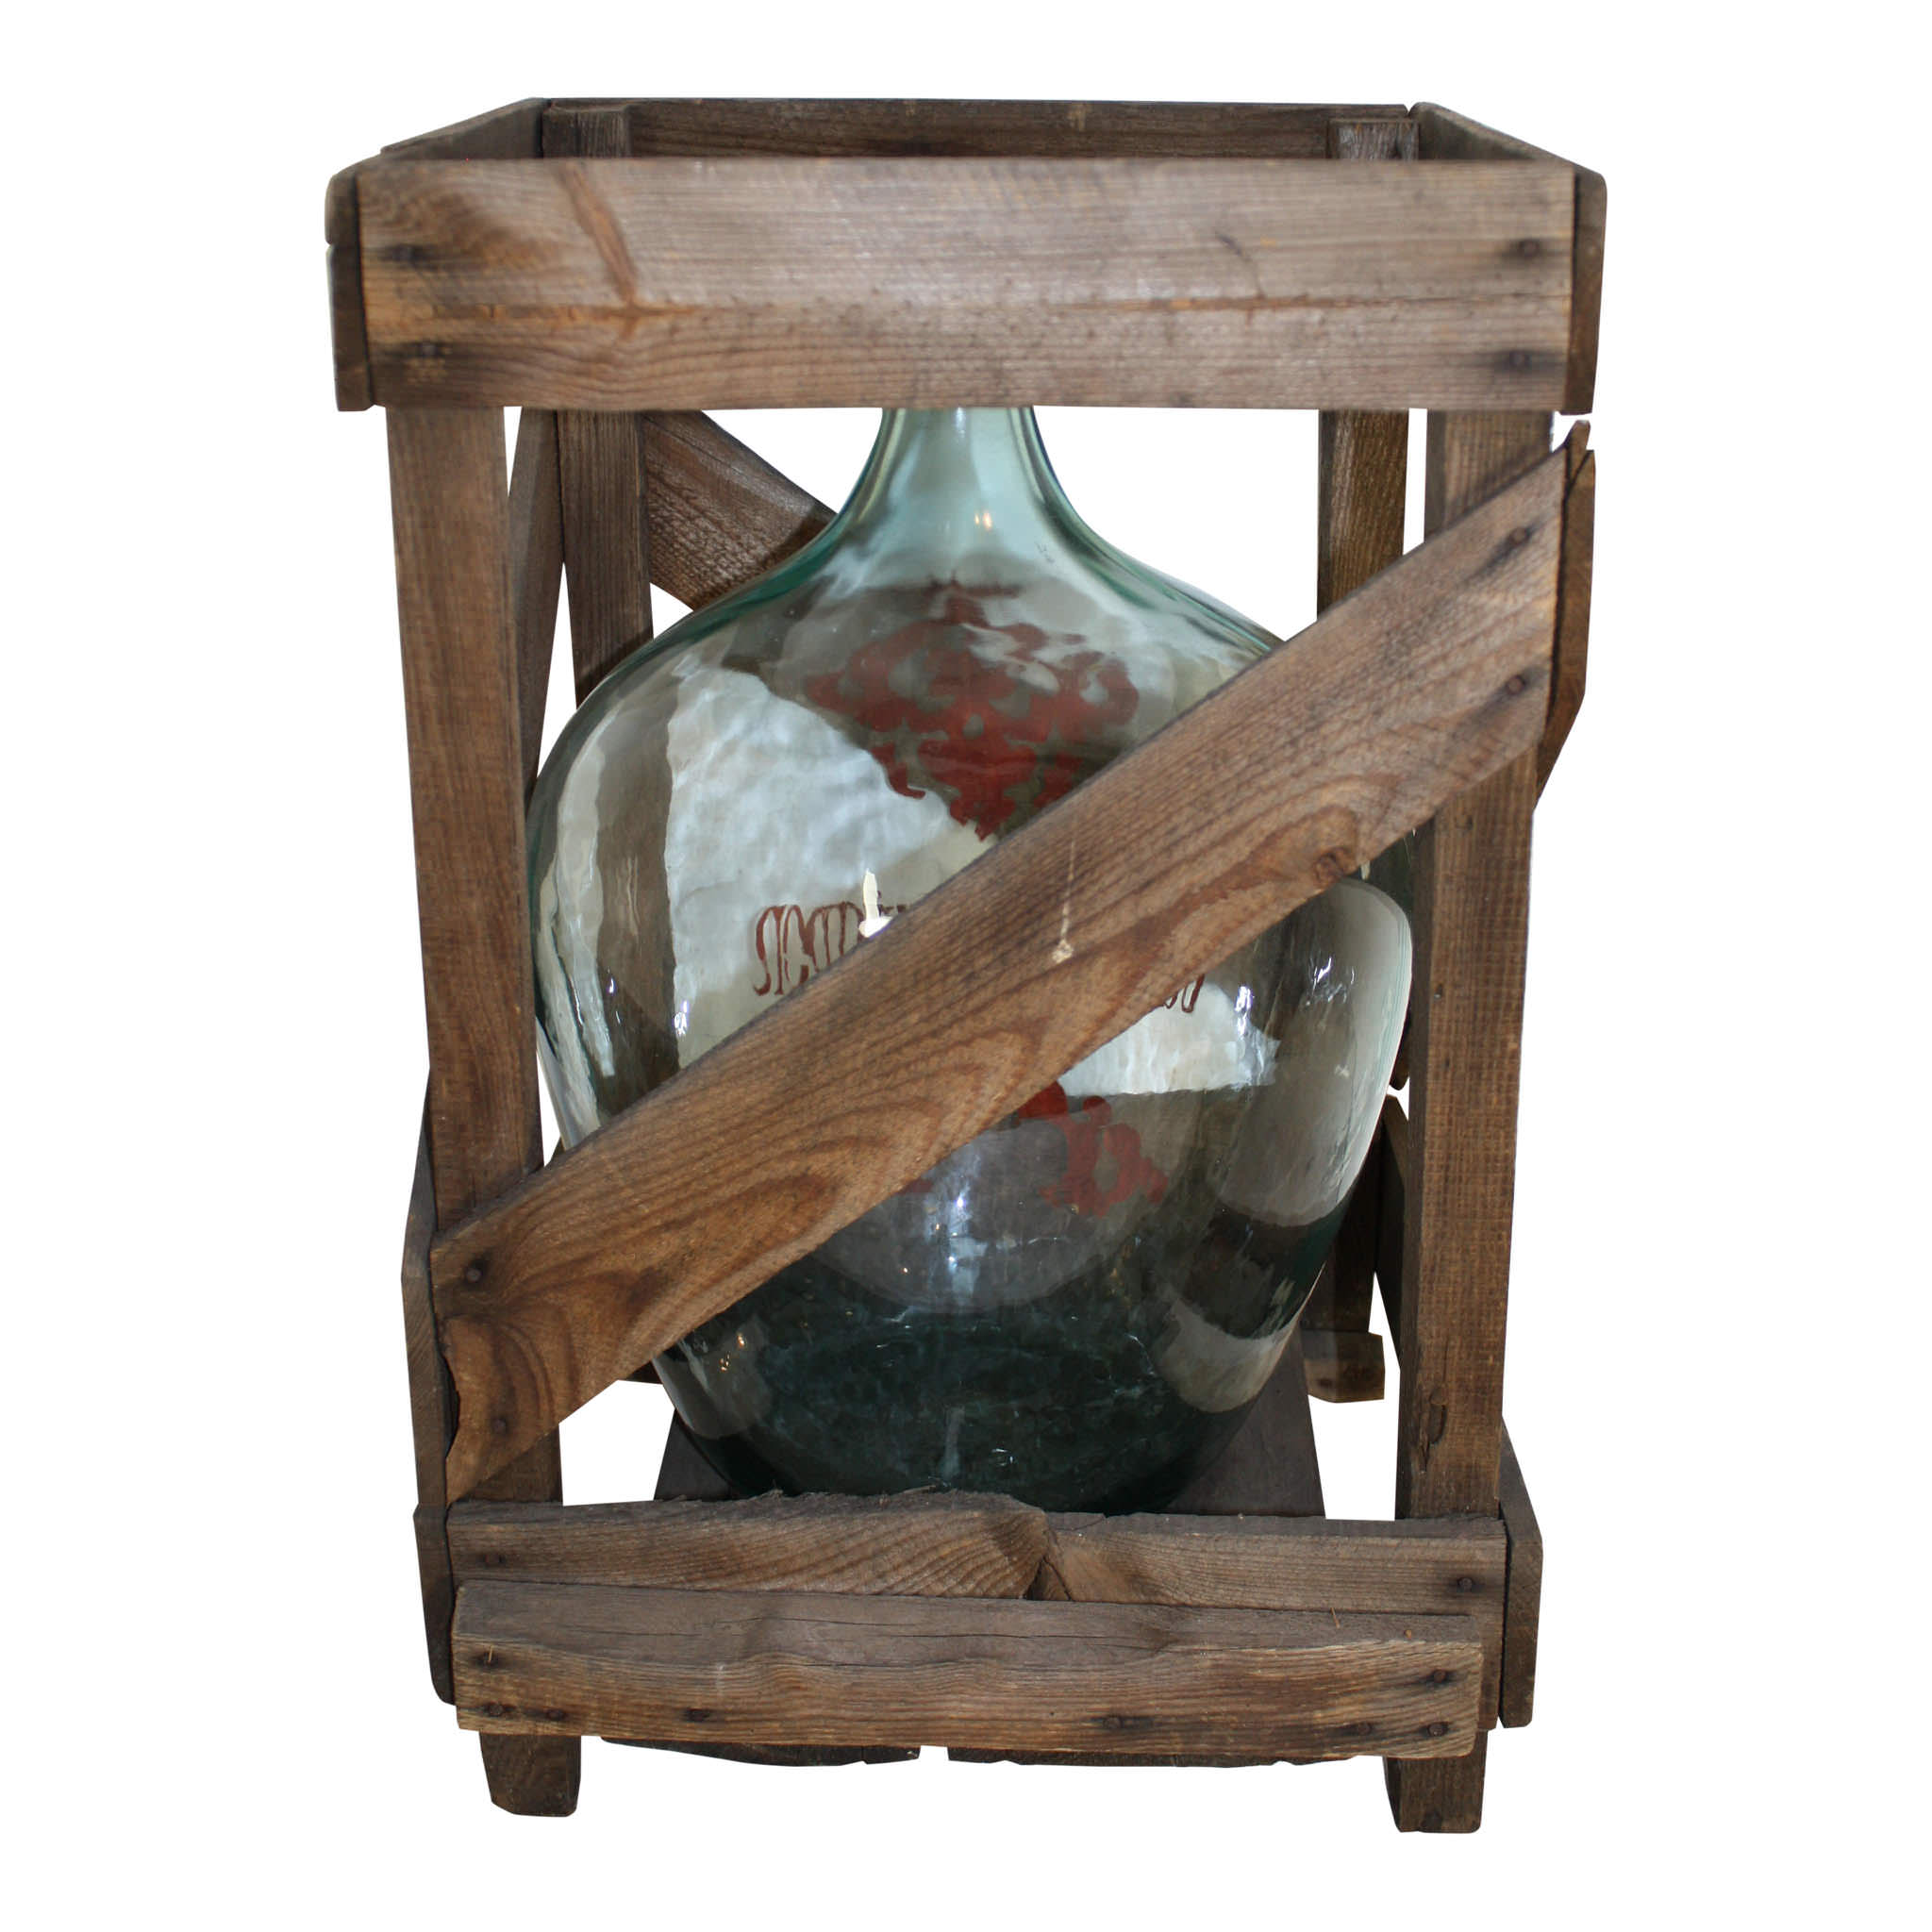 Painted Cabernet Sauvignon Demijohn in Wood Crate